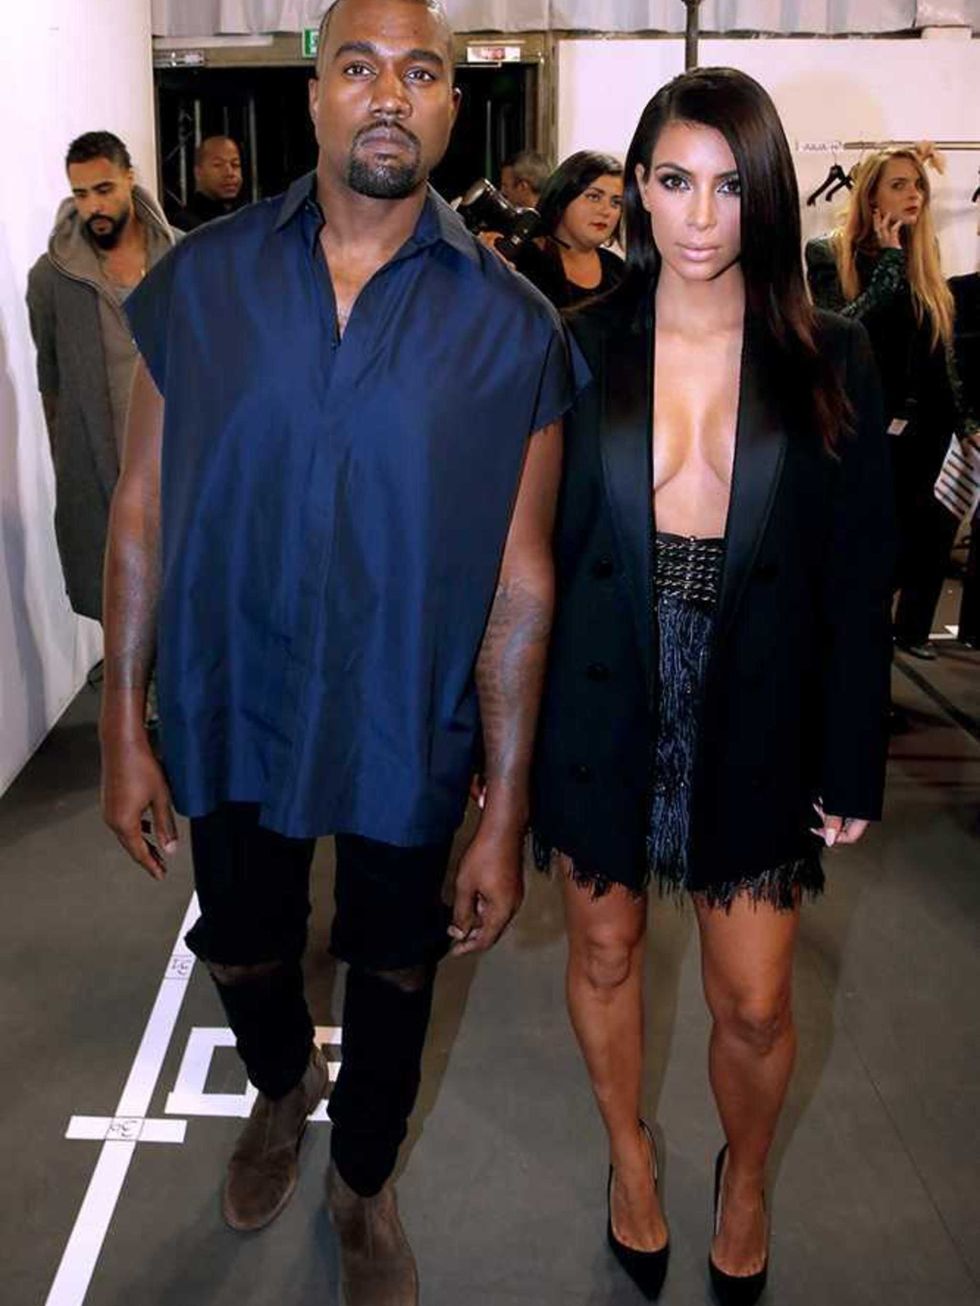 <p><strong>Most impressive his n hers coordination:</strong></p>

<p><a href="http://www.elleuk.com/tags/kim-kardashian">Kimye</a>. Obvs. This <a href="http://www.elleuk.com/catwalk/lanvin/spring-summer-2015">Lanvin</a> look was a particular highlight.<